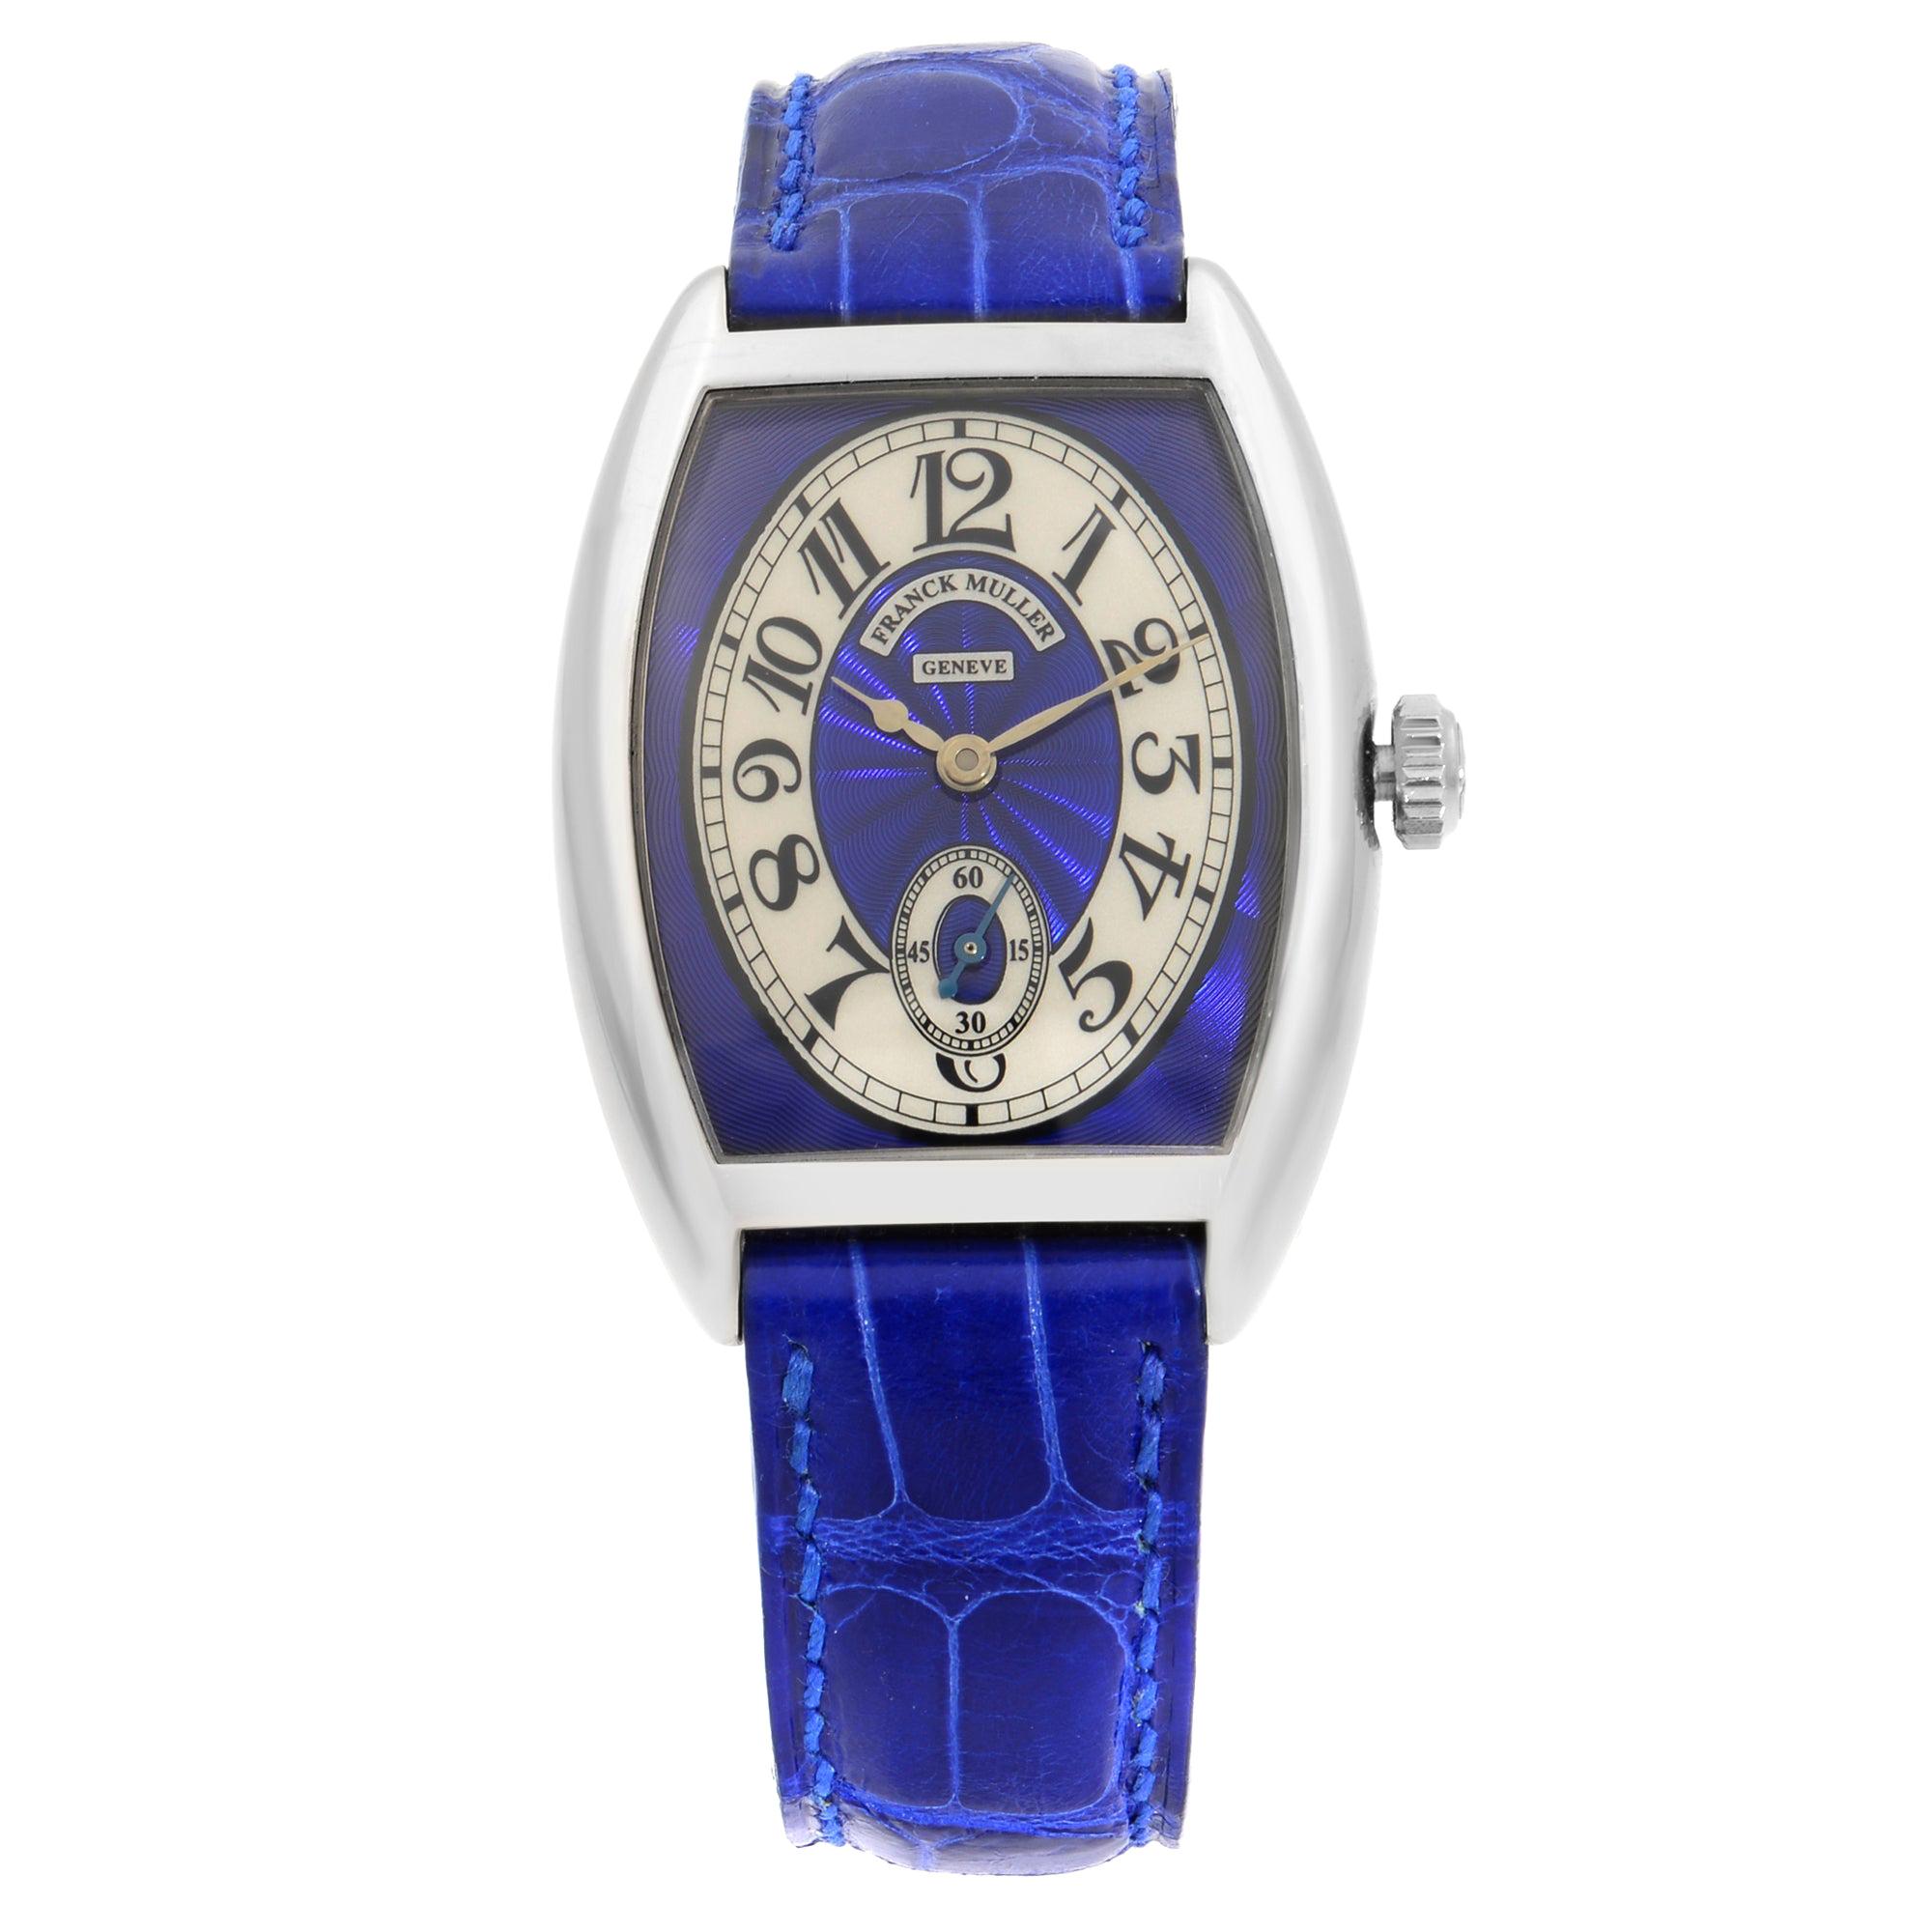 Franck Muller Cintree 18K Gold Blue Silver Dial Hand-Wind Ladies Watch 7502 S6 For Sale